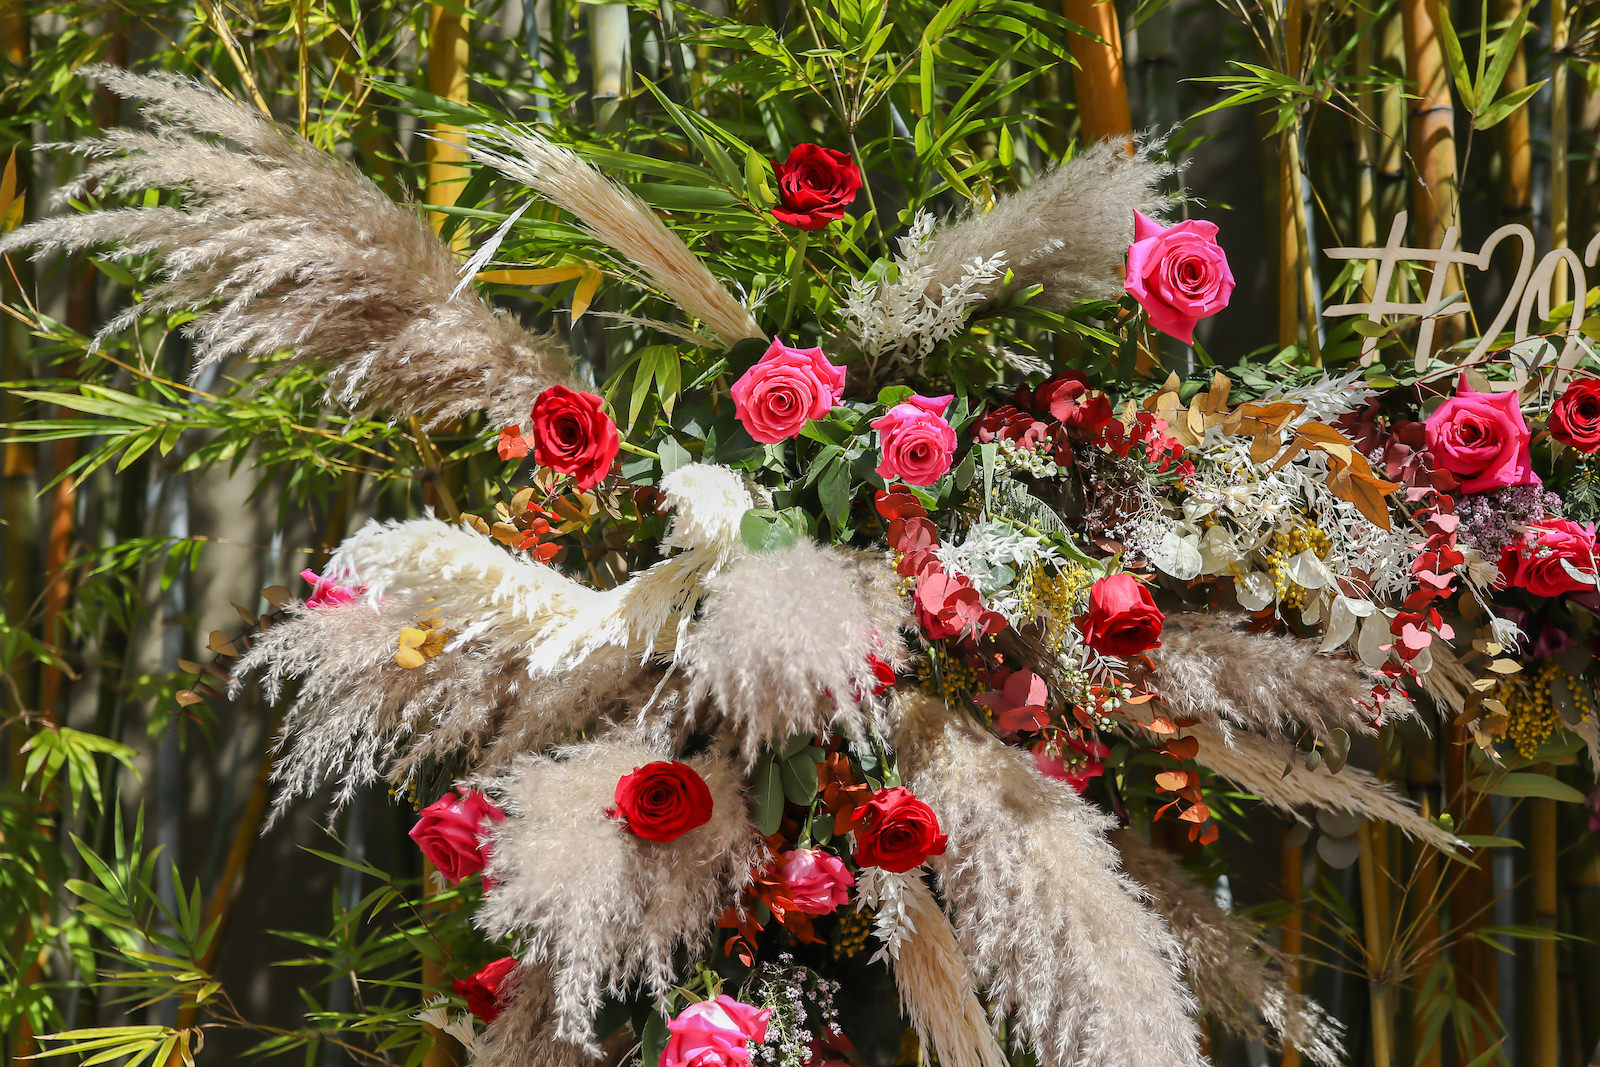 Whimsical Boho Wedding Floral Arrangement with Pampas Grass and Vibrant Roses | Tampa Wedding Florist Monarch Events and Design